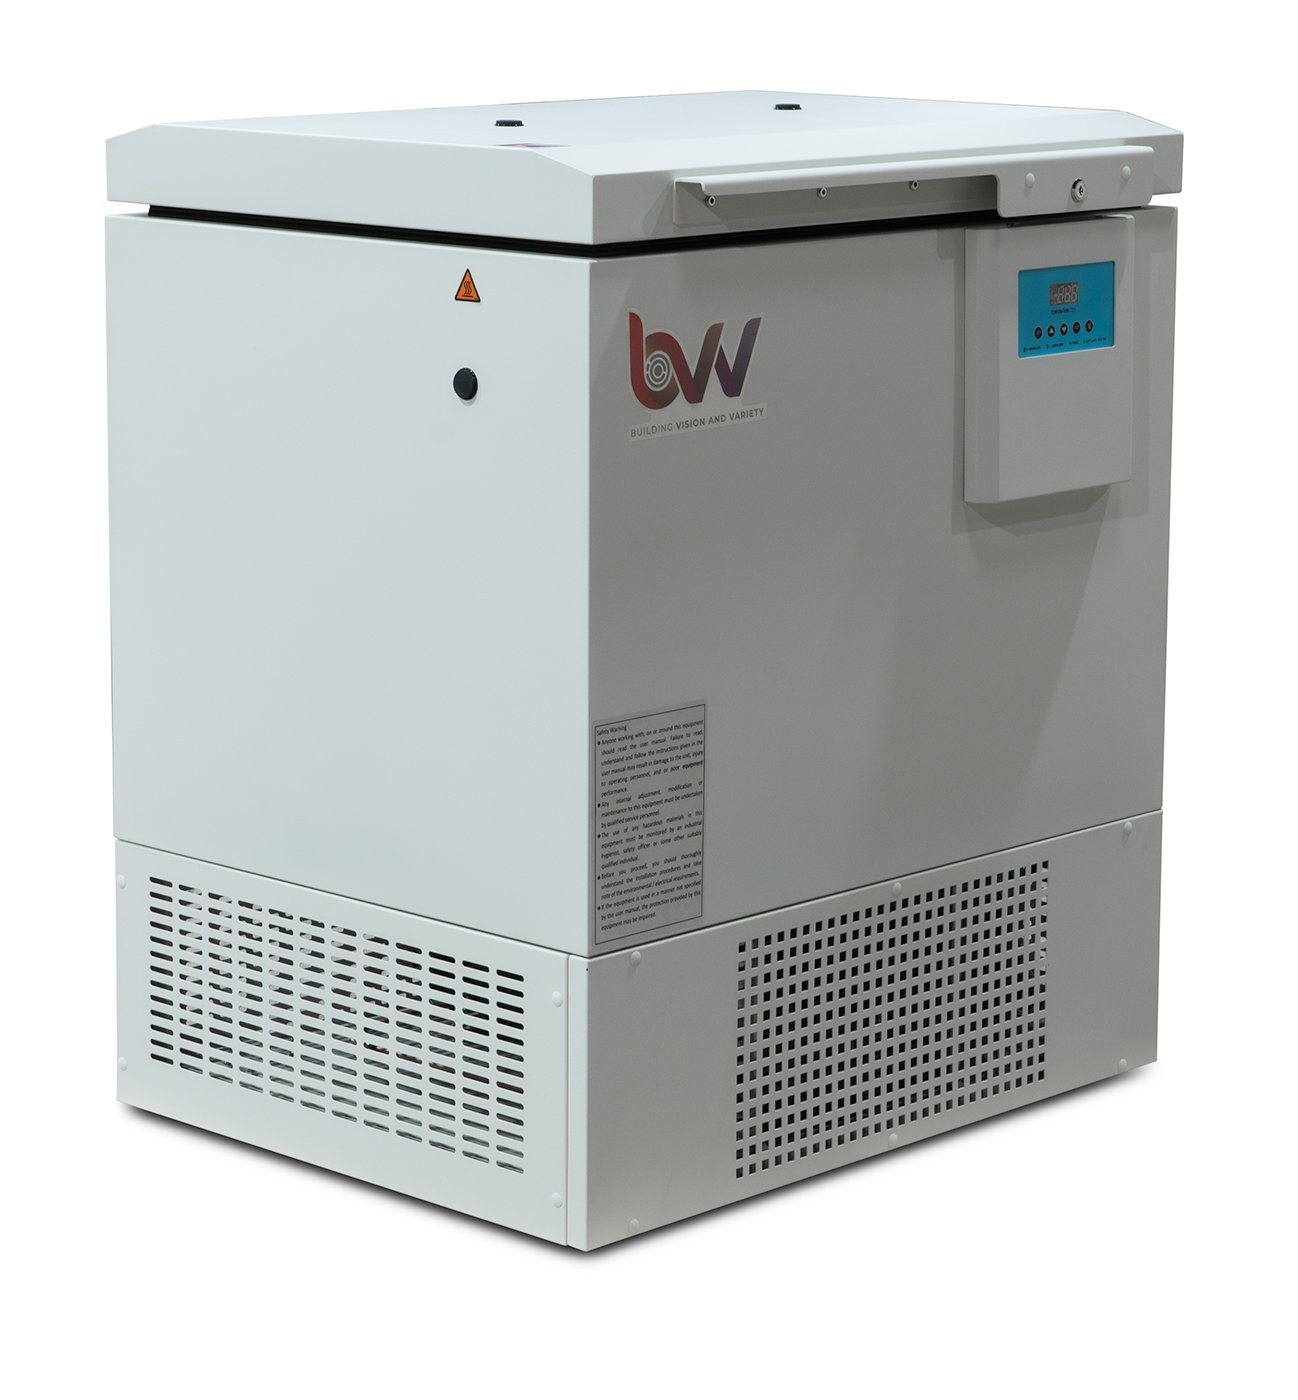 BVV&trade; ULTRA-Low Chest Style Freezer (-86°C) 4.5 Cubic Feet New Products BVV 